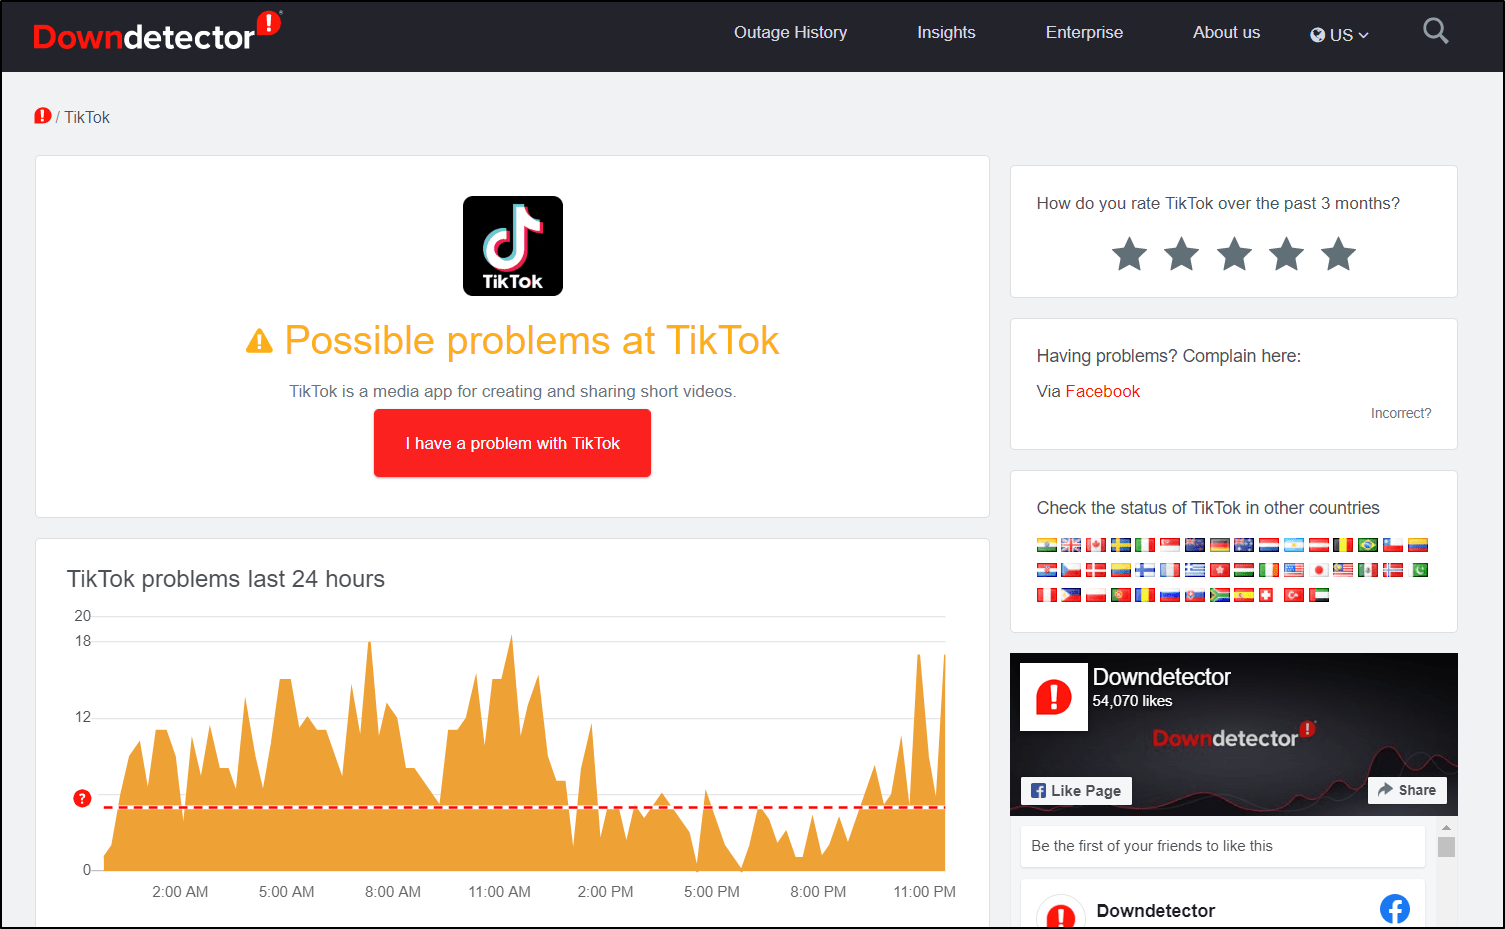 check tiktok server status on downdetector if can't log in to TikTok, "Too many attempts, please try again" error message, or login failed